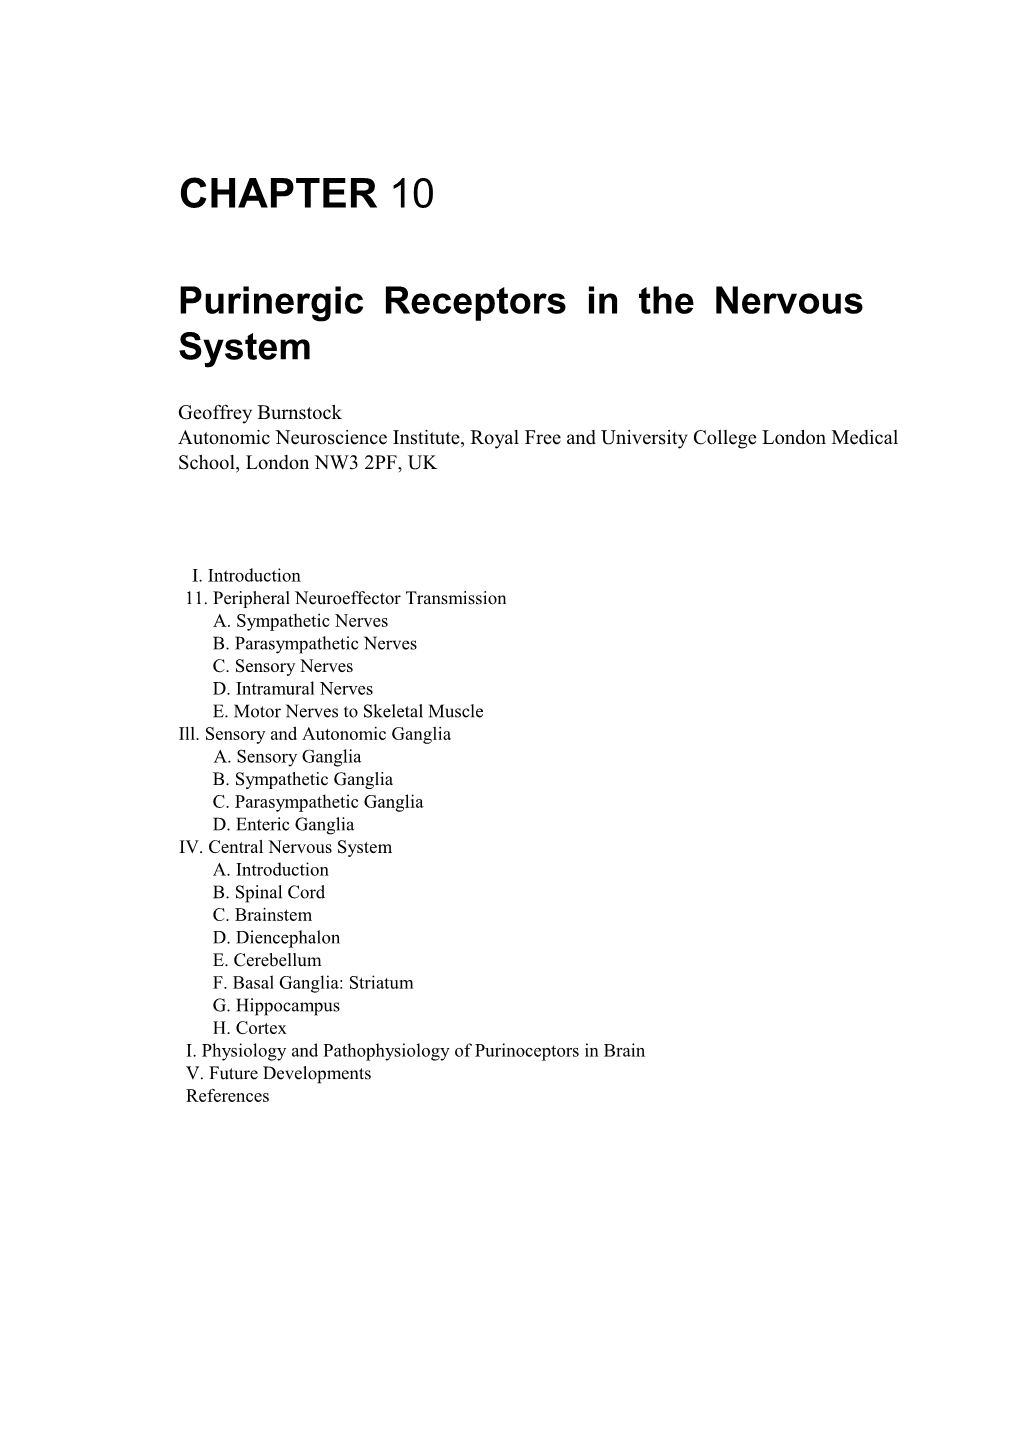 Purinergic Receptors in the Nervous System